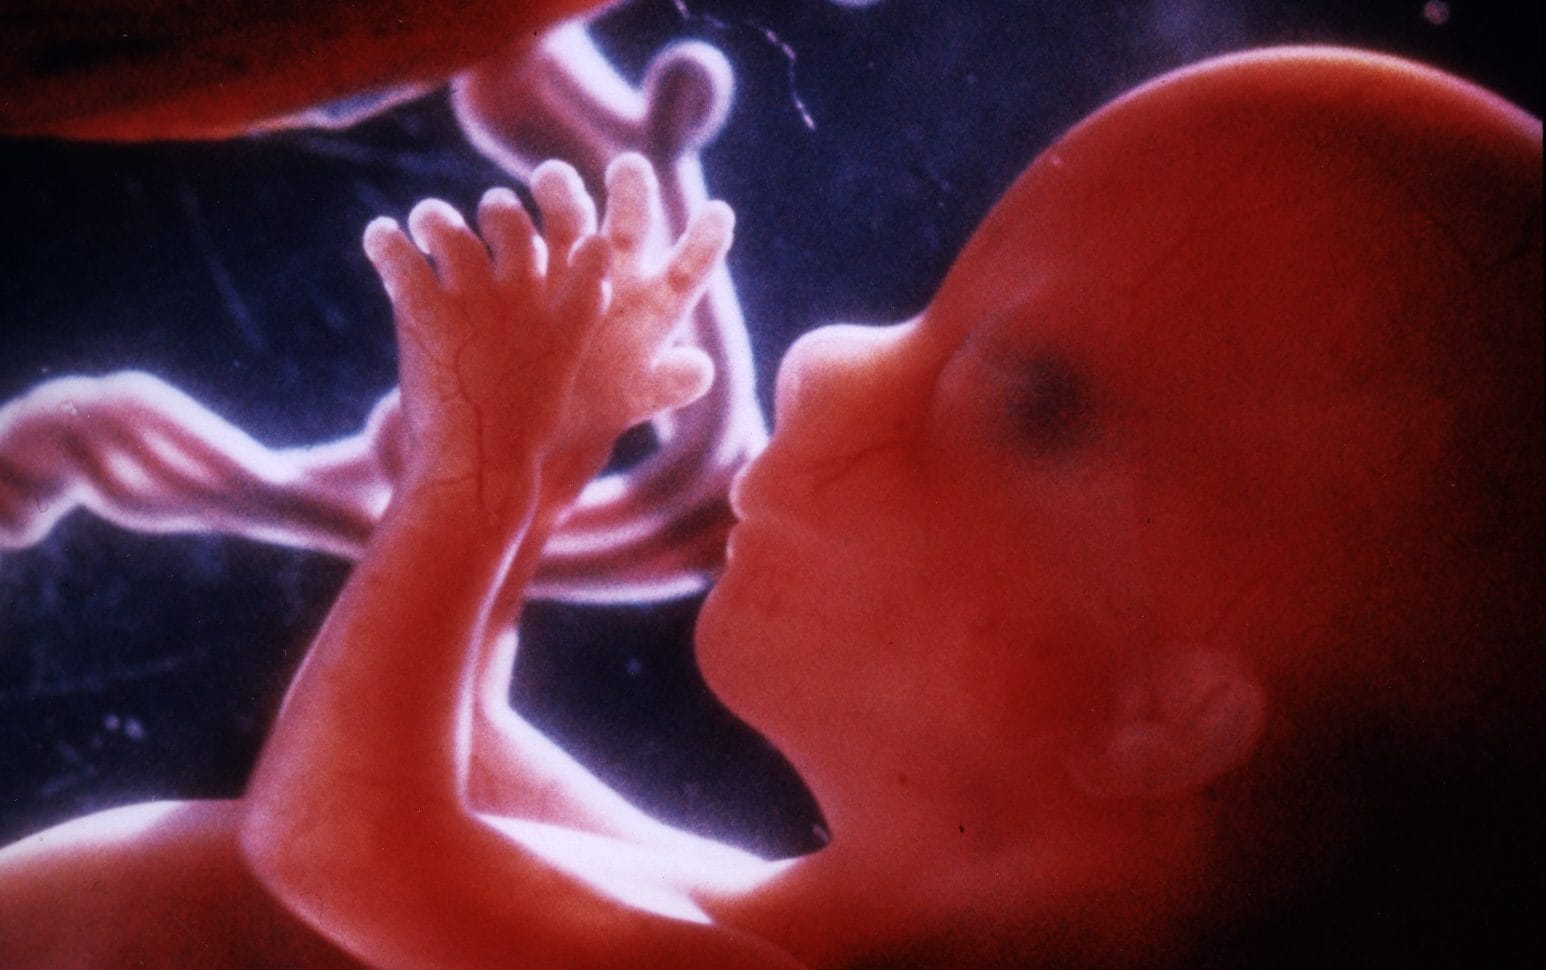 tiny organs grown from amniotic fluid could spot problems before birth